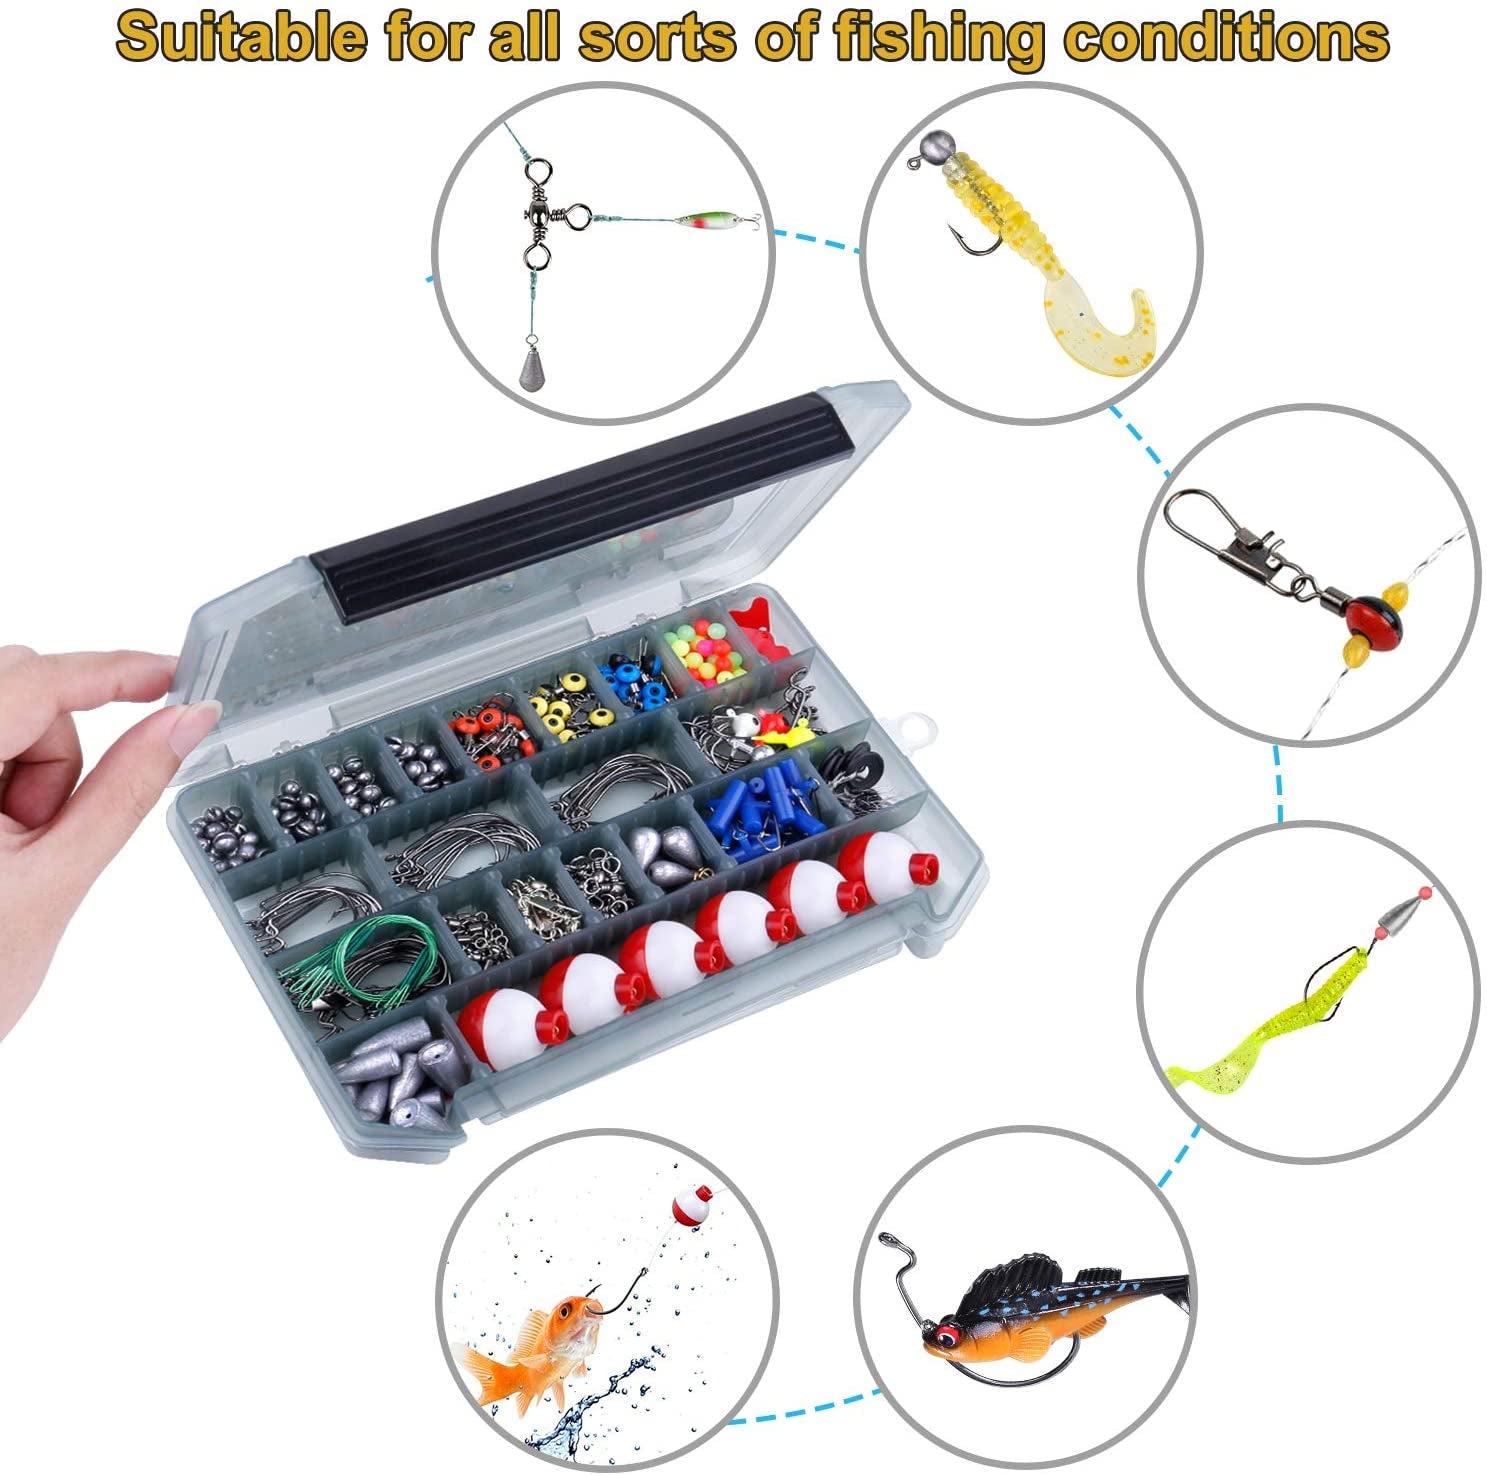 187/343Pcs Fishing Accessories Kit, Including Jig Hooks, Bullet Bass Casting Sinker Weights, Fishing Swivels Snaps, Sinker Slides, Fishing Set with Tackle Box